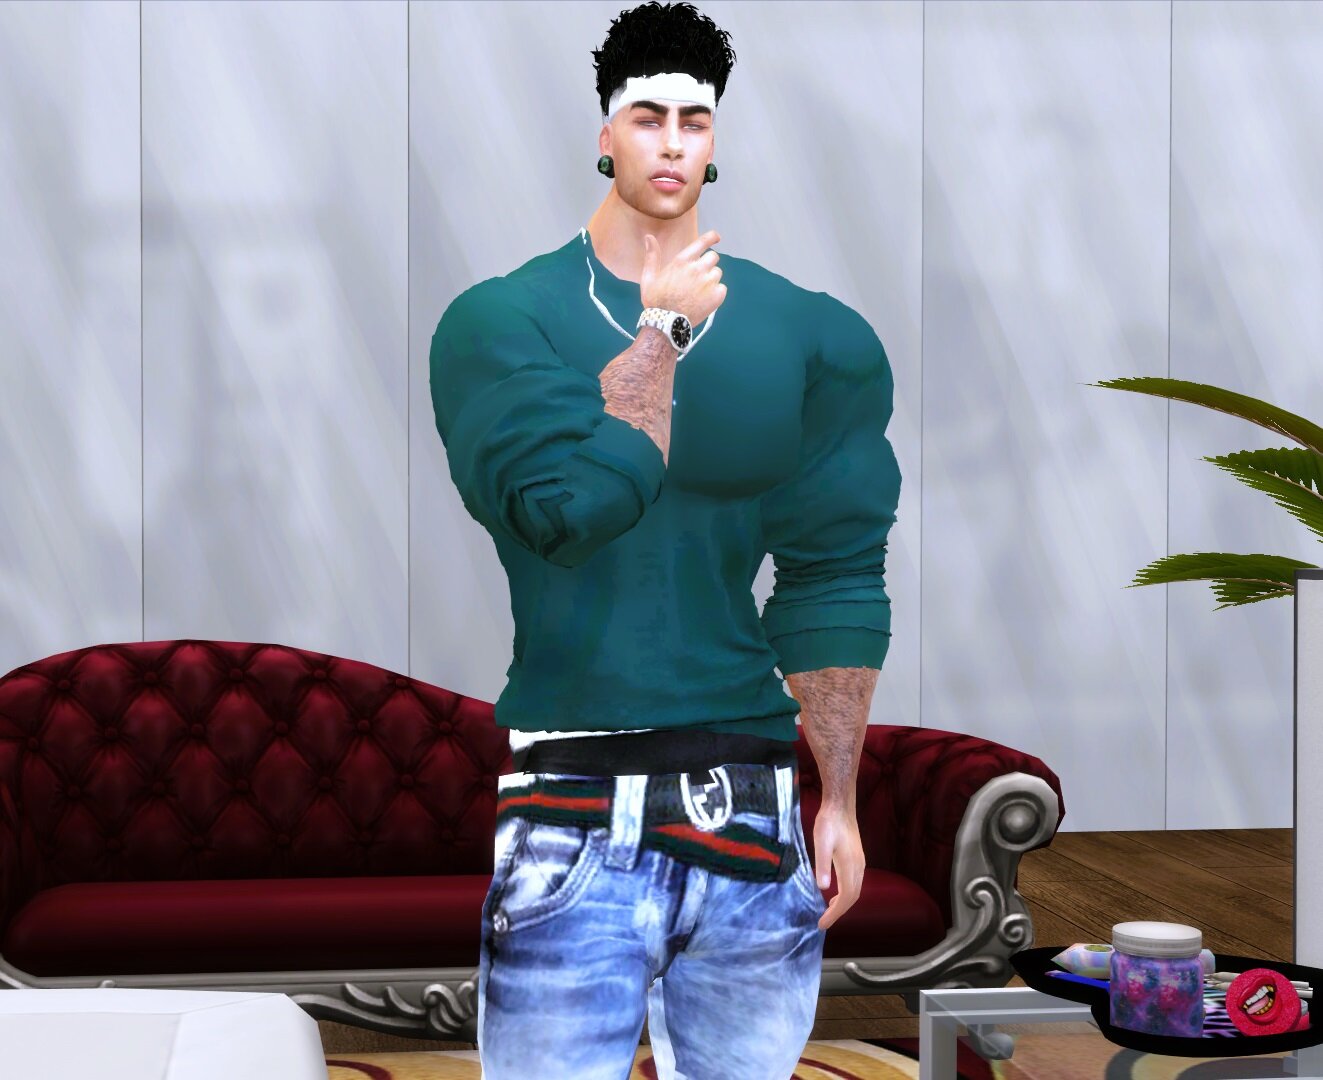 Share Your Male Sims! - Page 237 - The Sims 4 General Discussion ...